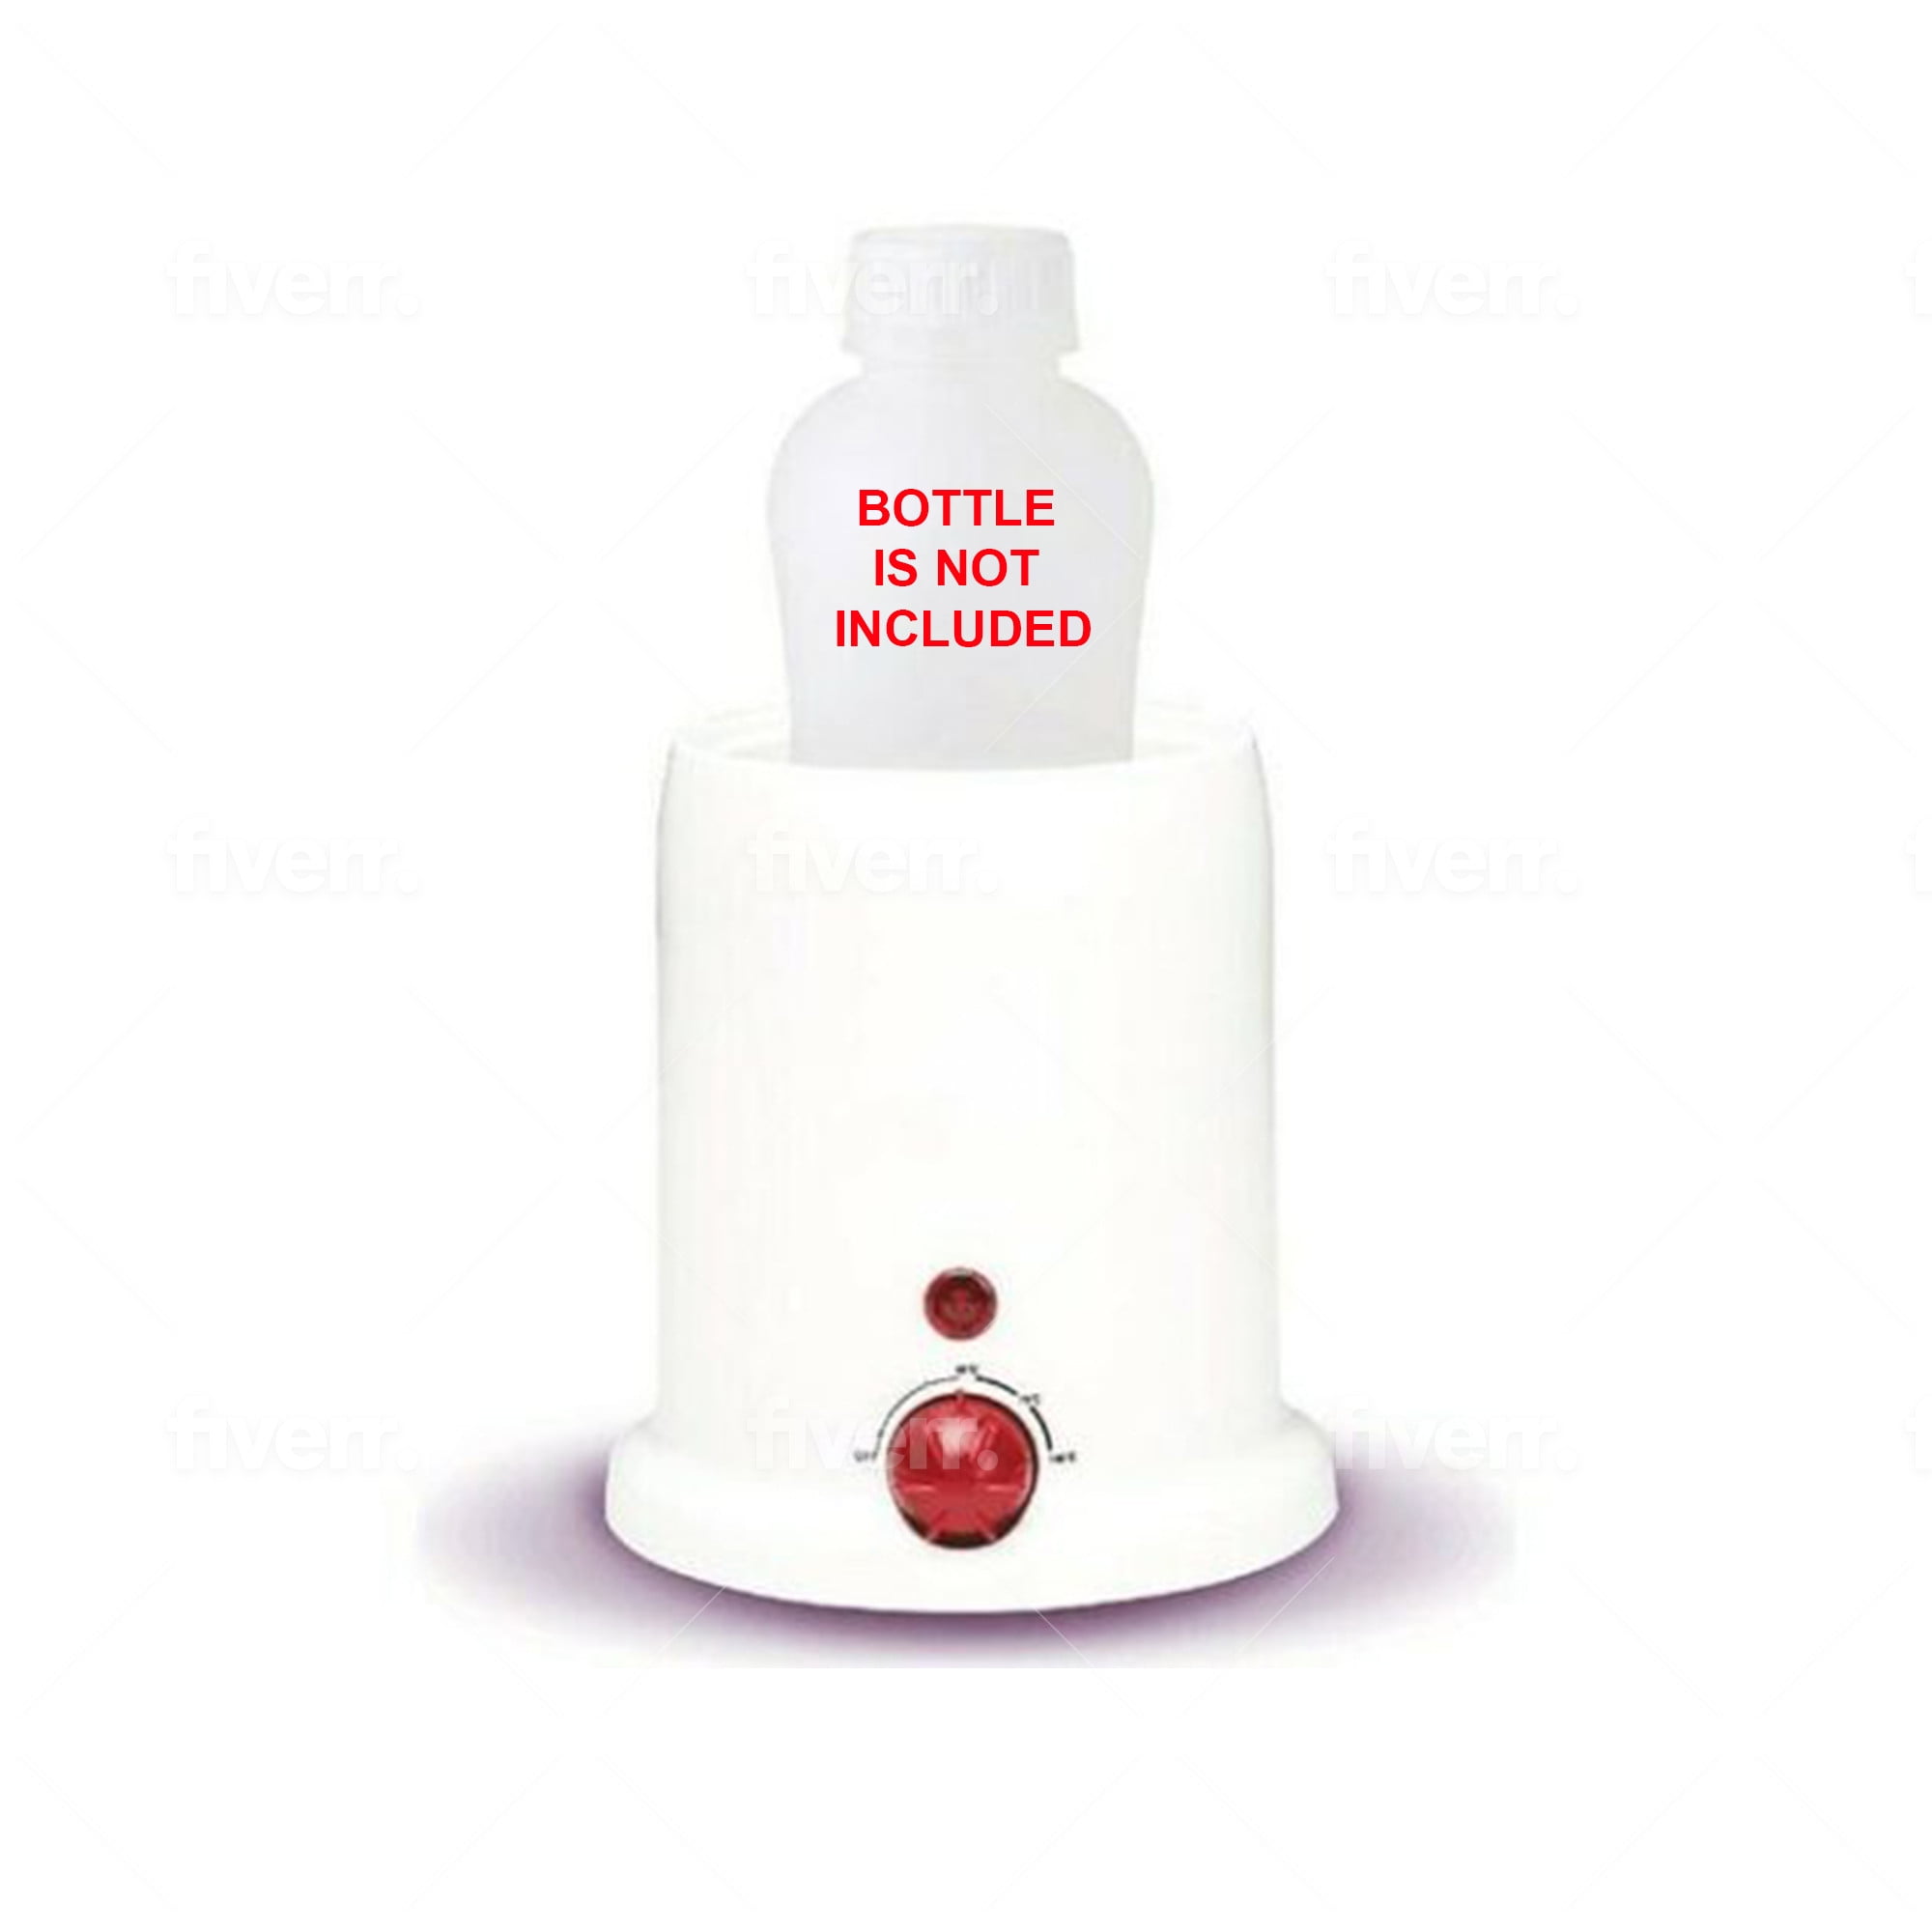 MASSAGE OIL/LOTION WARMER WITH VARIABLE FAST HEAT TEMPERATURE SETTINGS